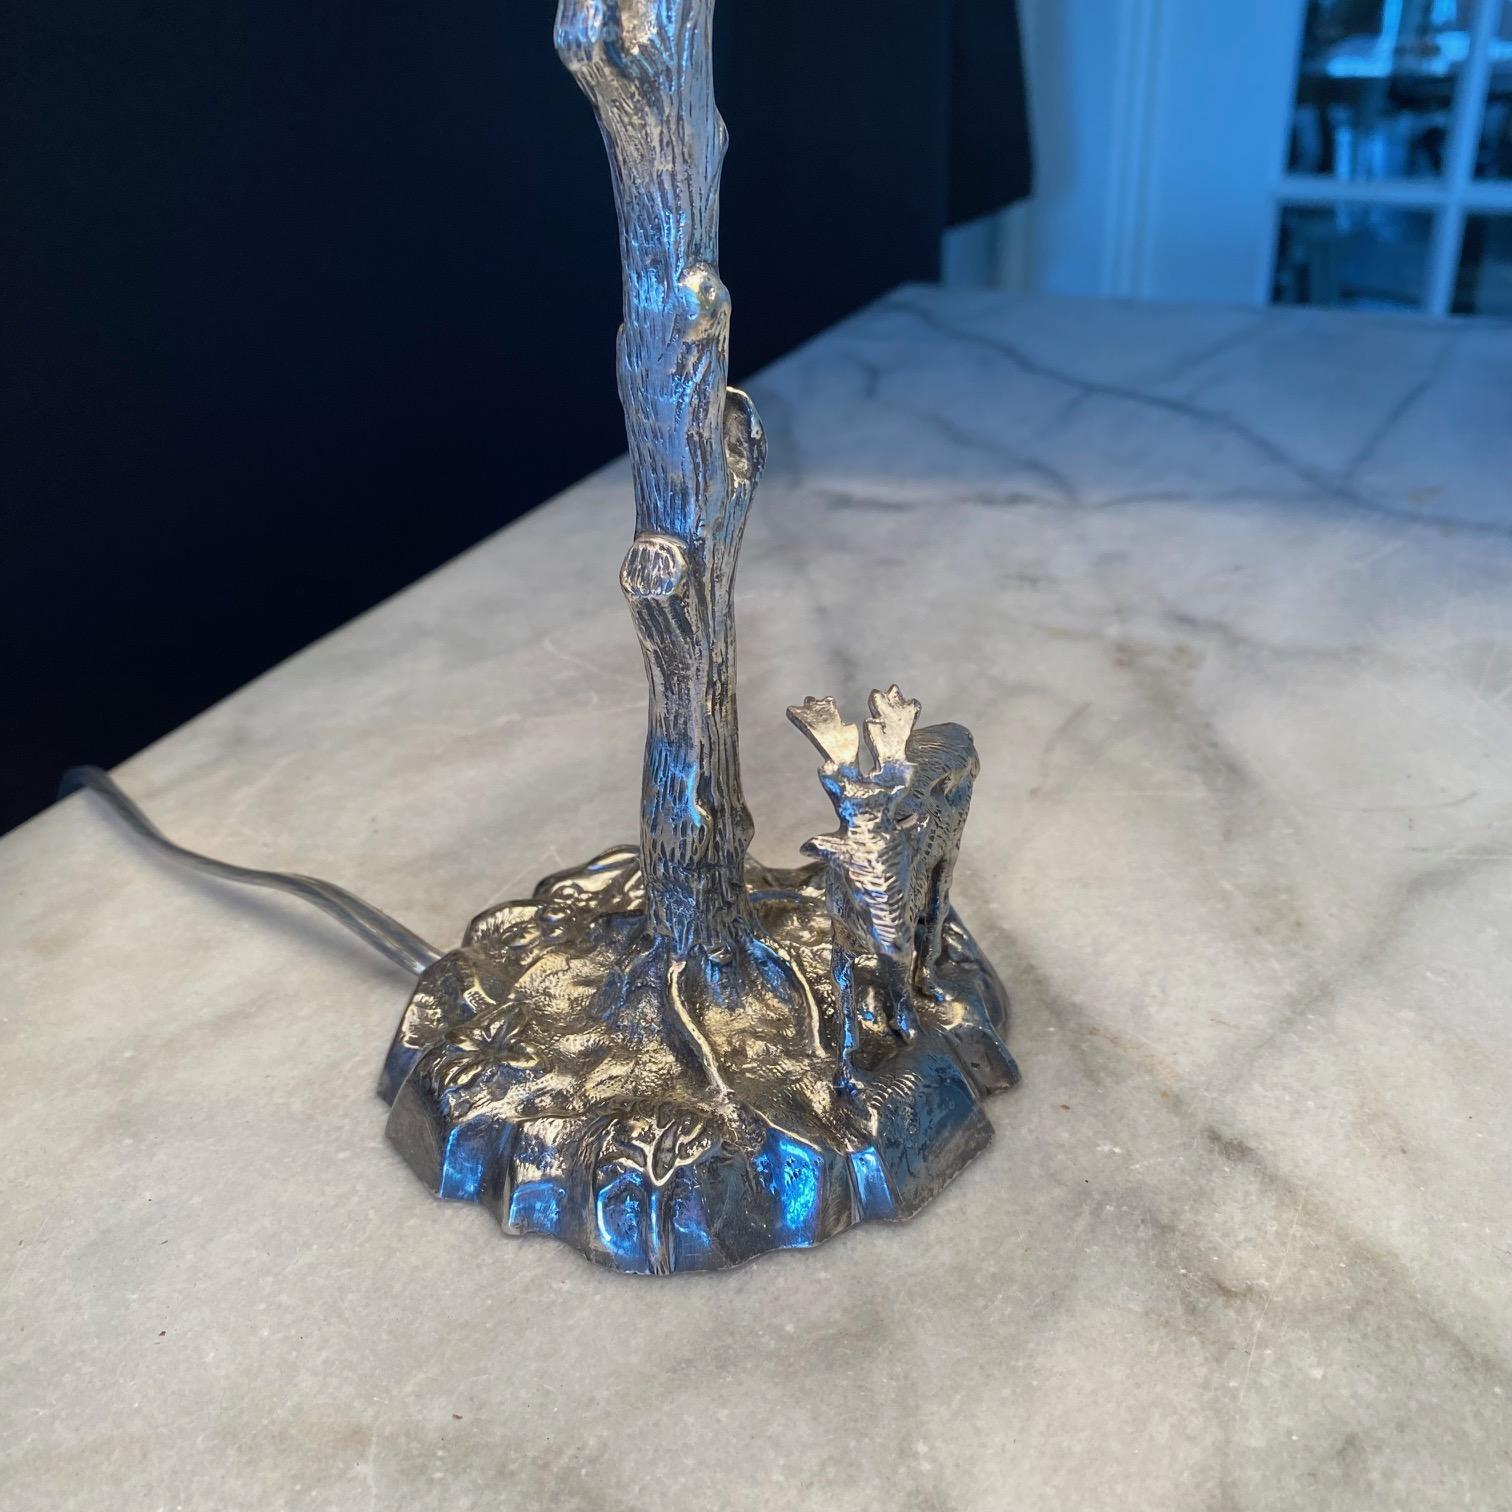 Late 20th Century Signed Valenti Stag or Deer Sculpture Silver on Bronze Table Lamp For Sale